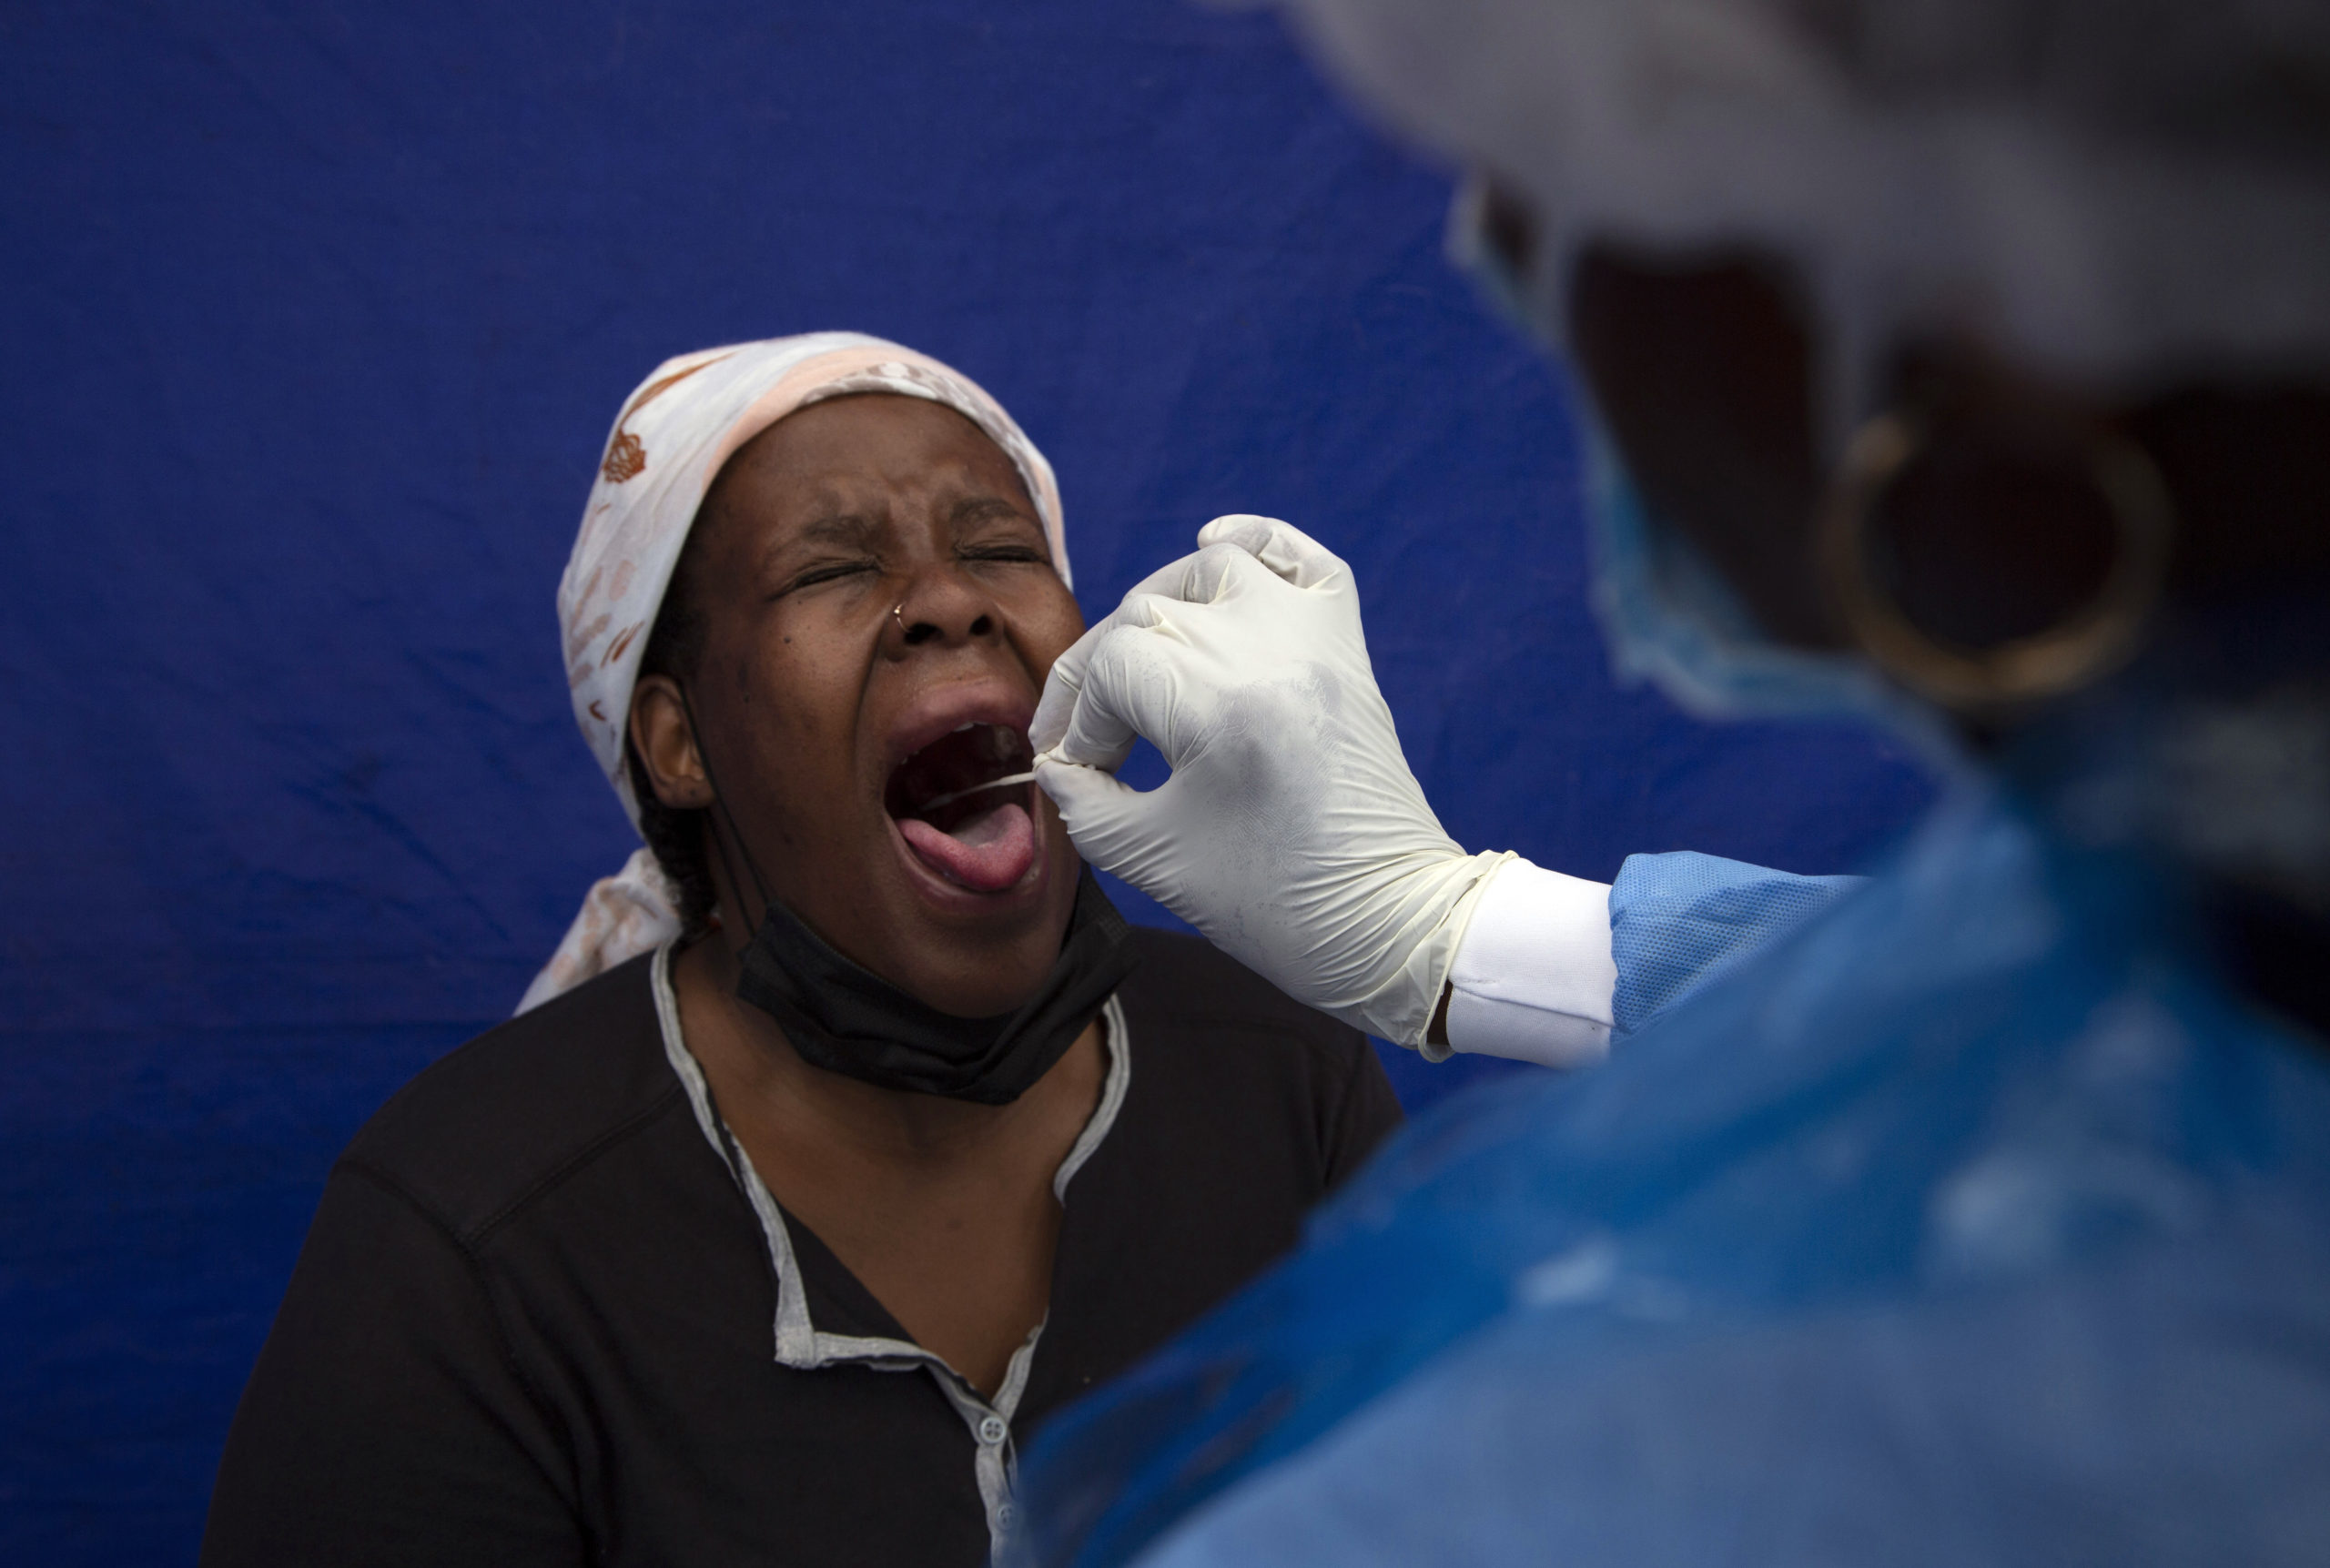 A throat swab is taken from a patient to test for COVID-19 at a facility in Soweto, South Africa, D...